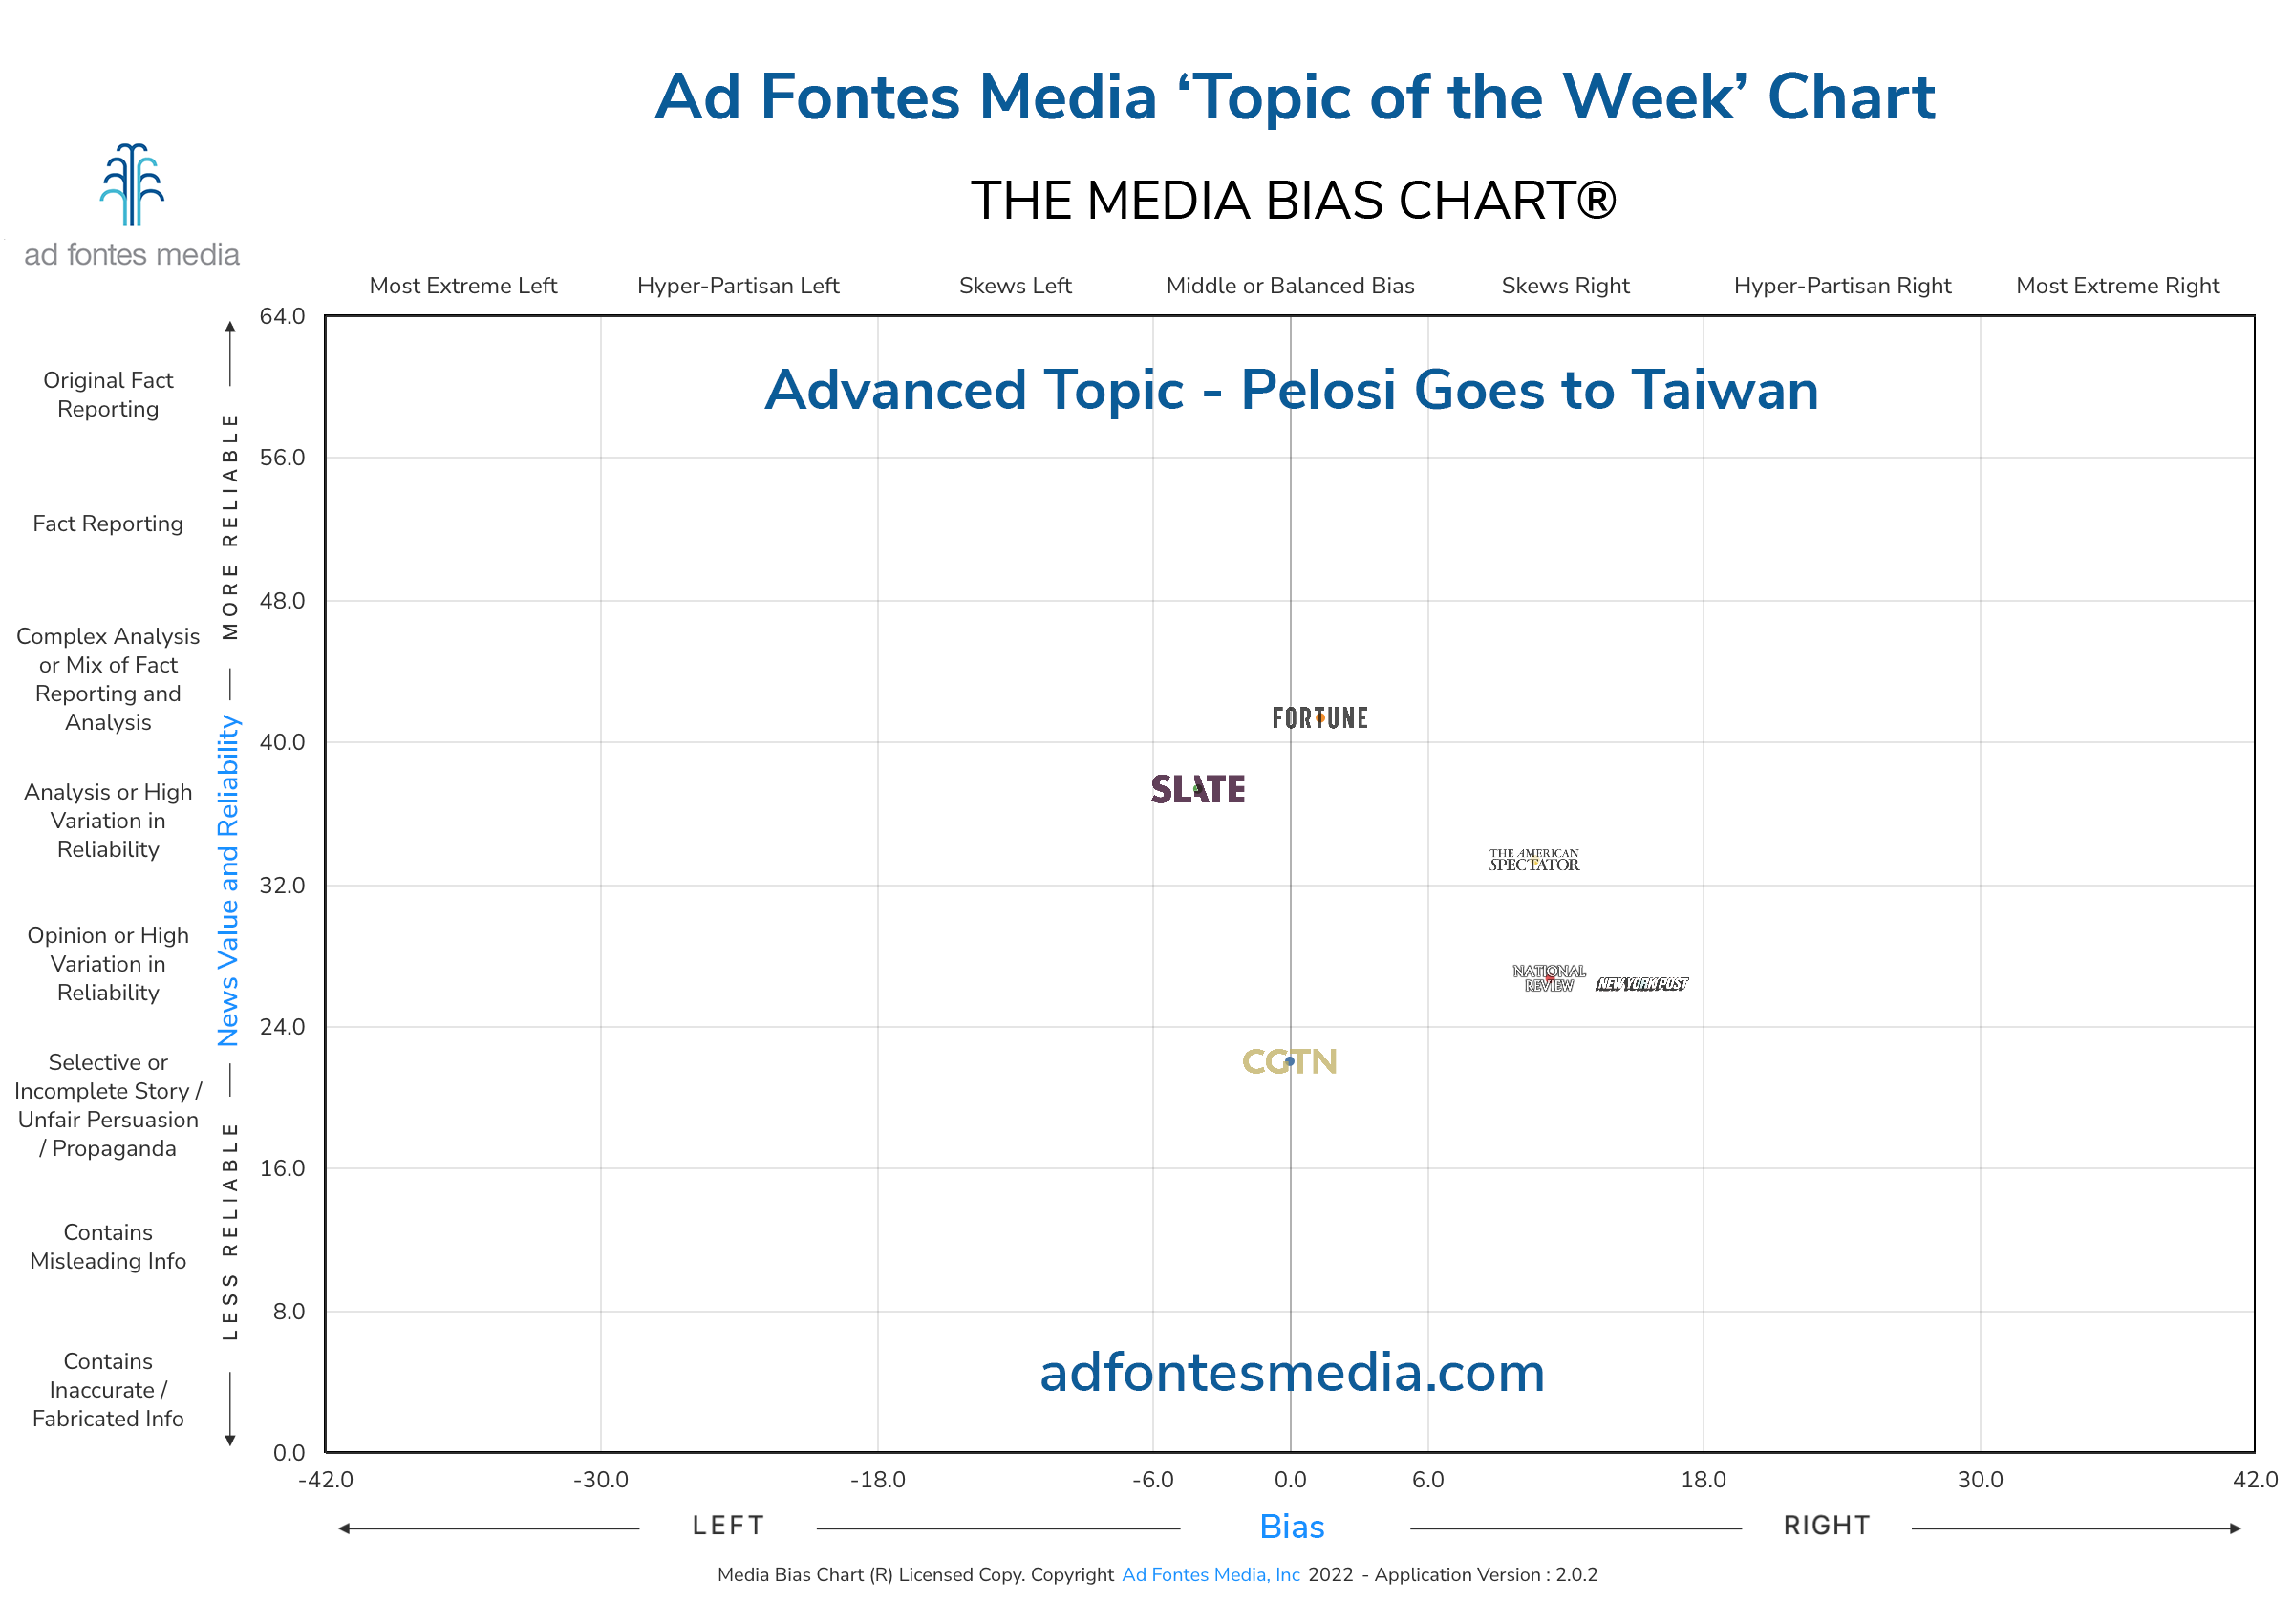 Scores of the Pelosi Goes to Taiwan articles on the chart